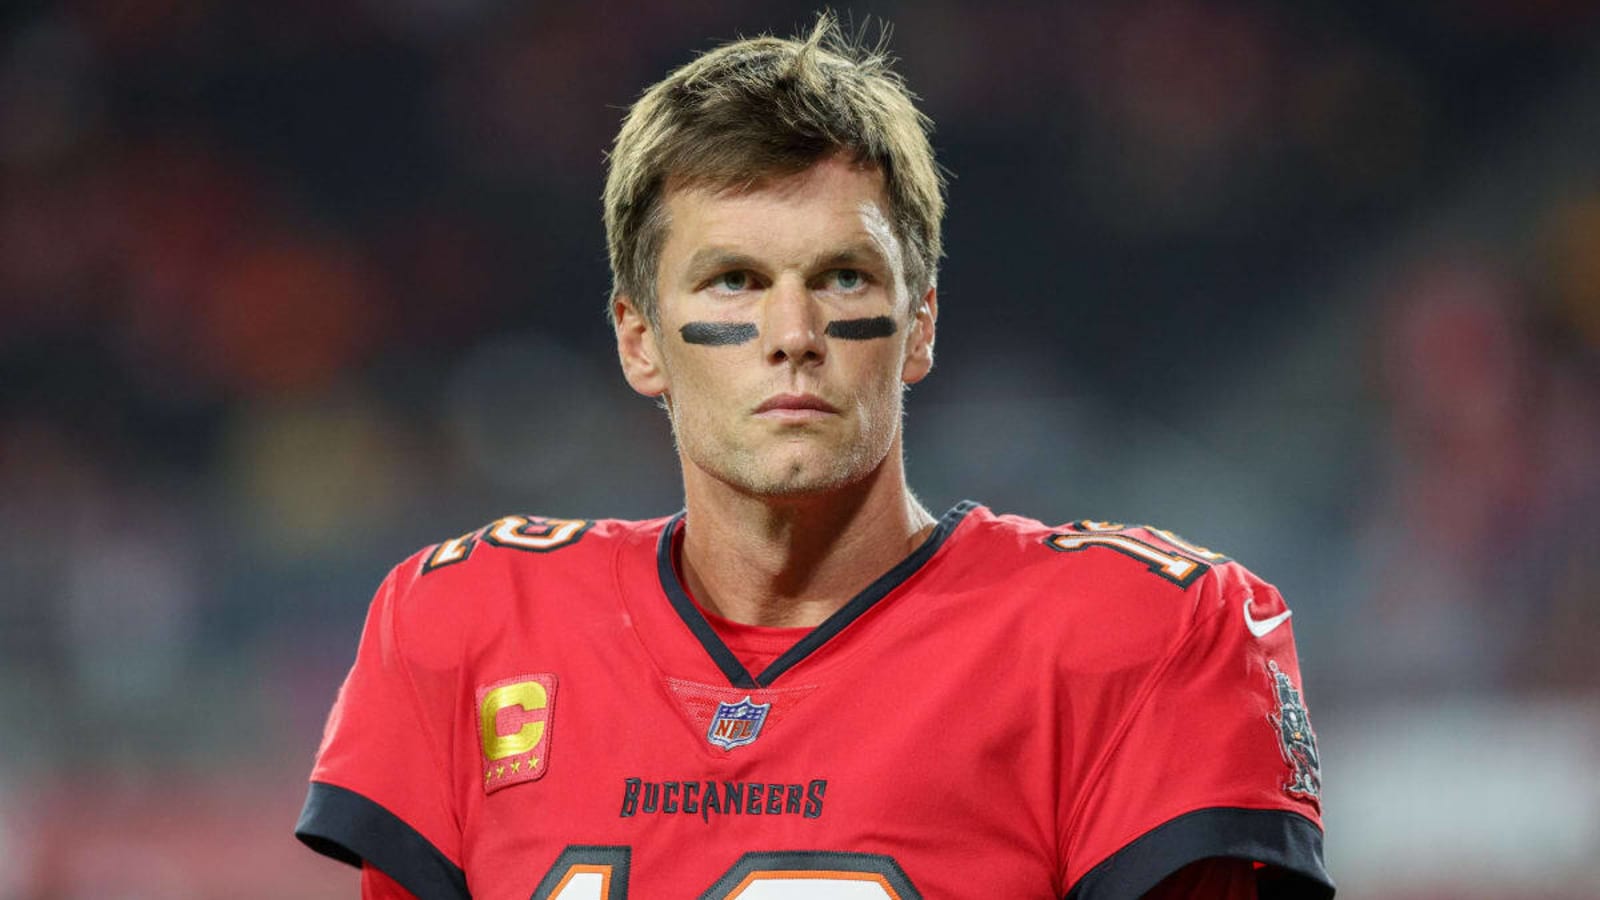 Tom Brady: "If I knew what I was going to f---ing do I would’ve already f---ing done it"